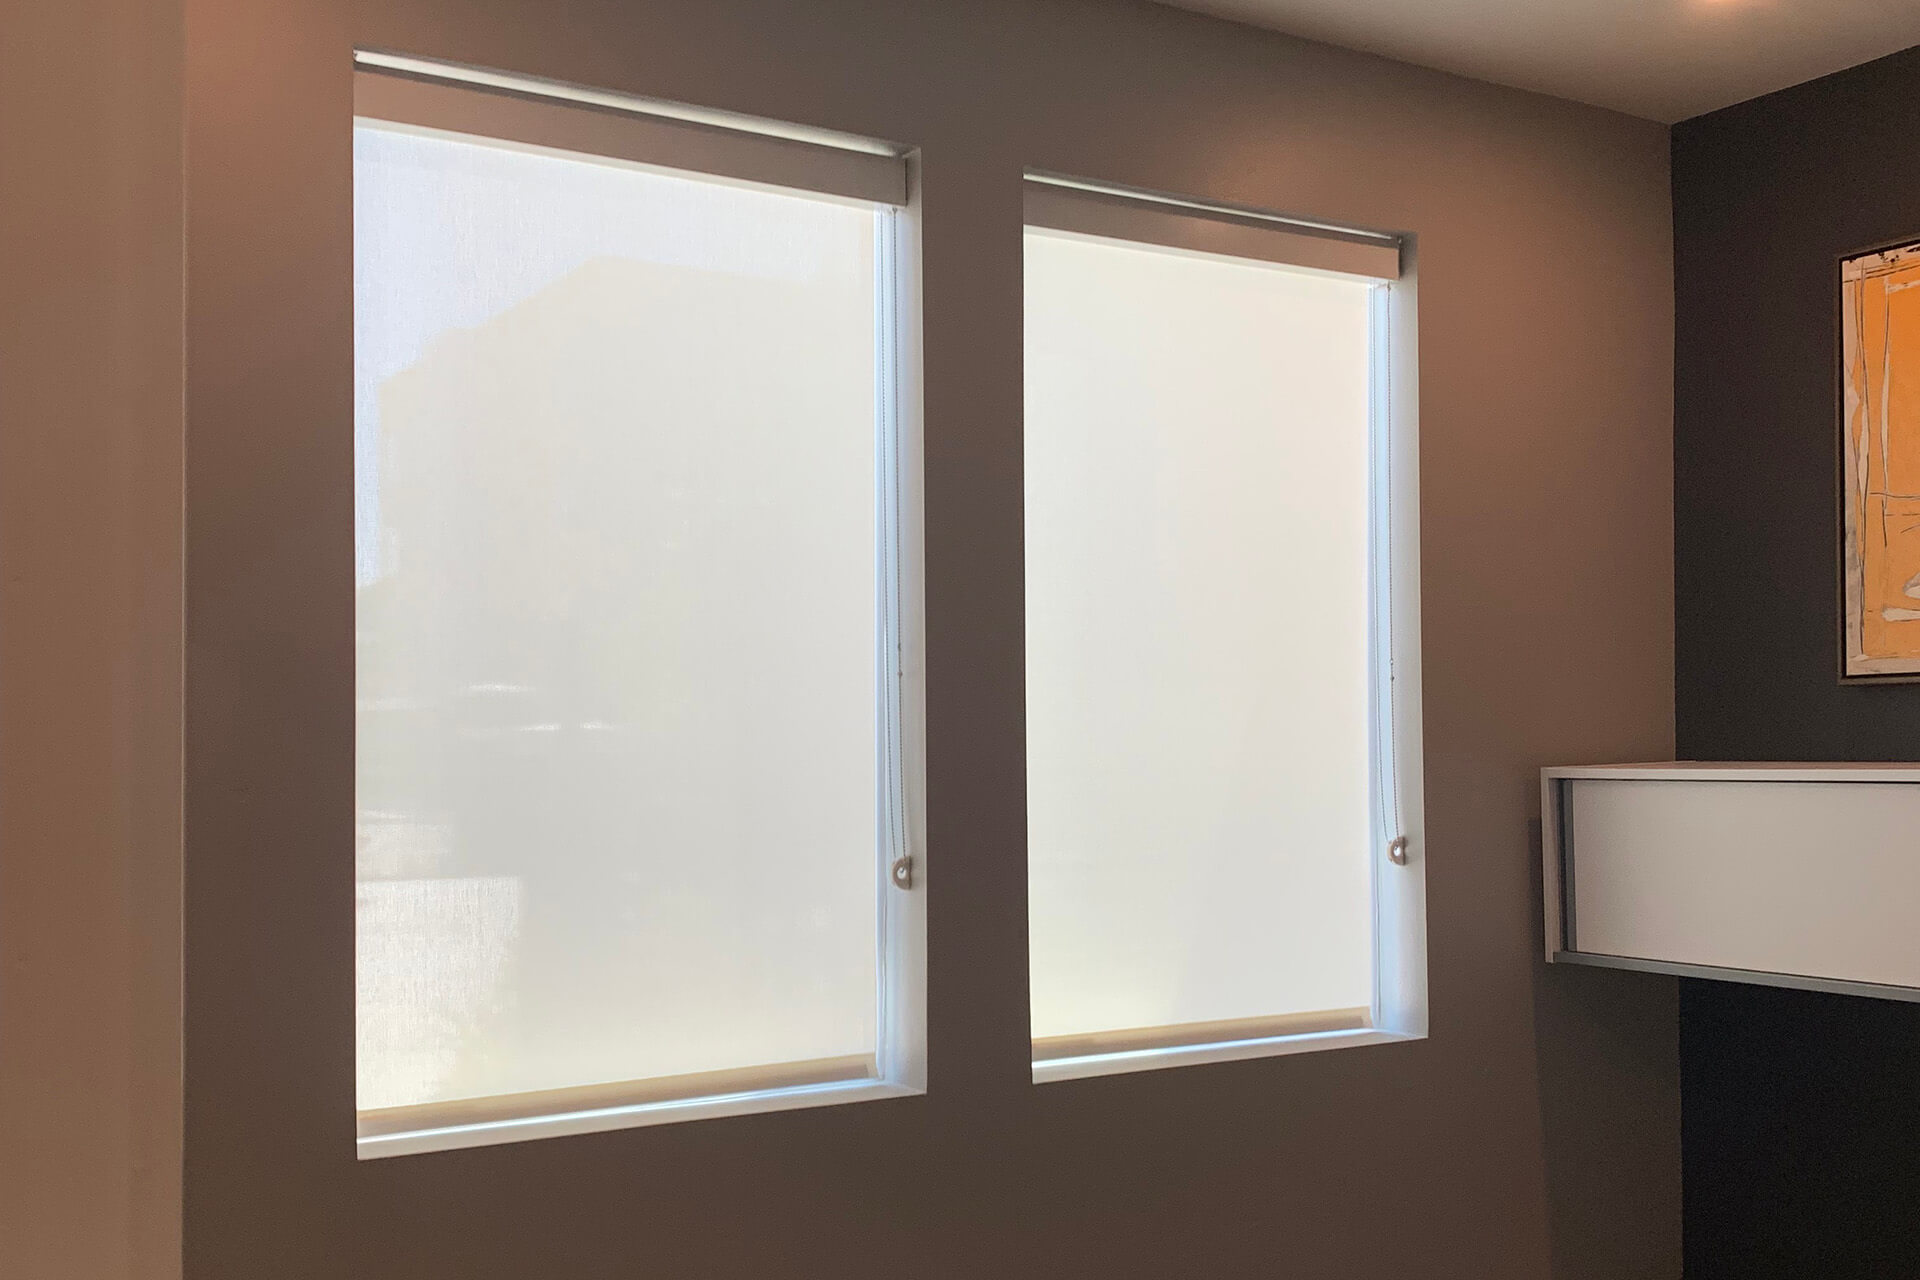 An office room with two windows, each completely covered by roller shades.